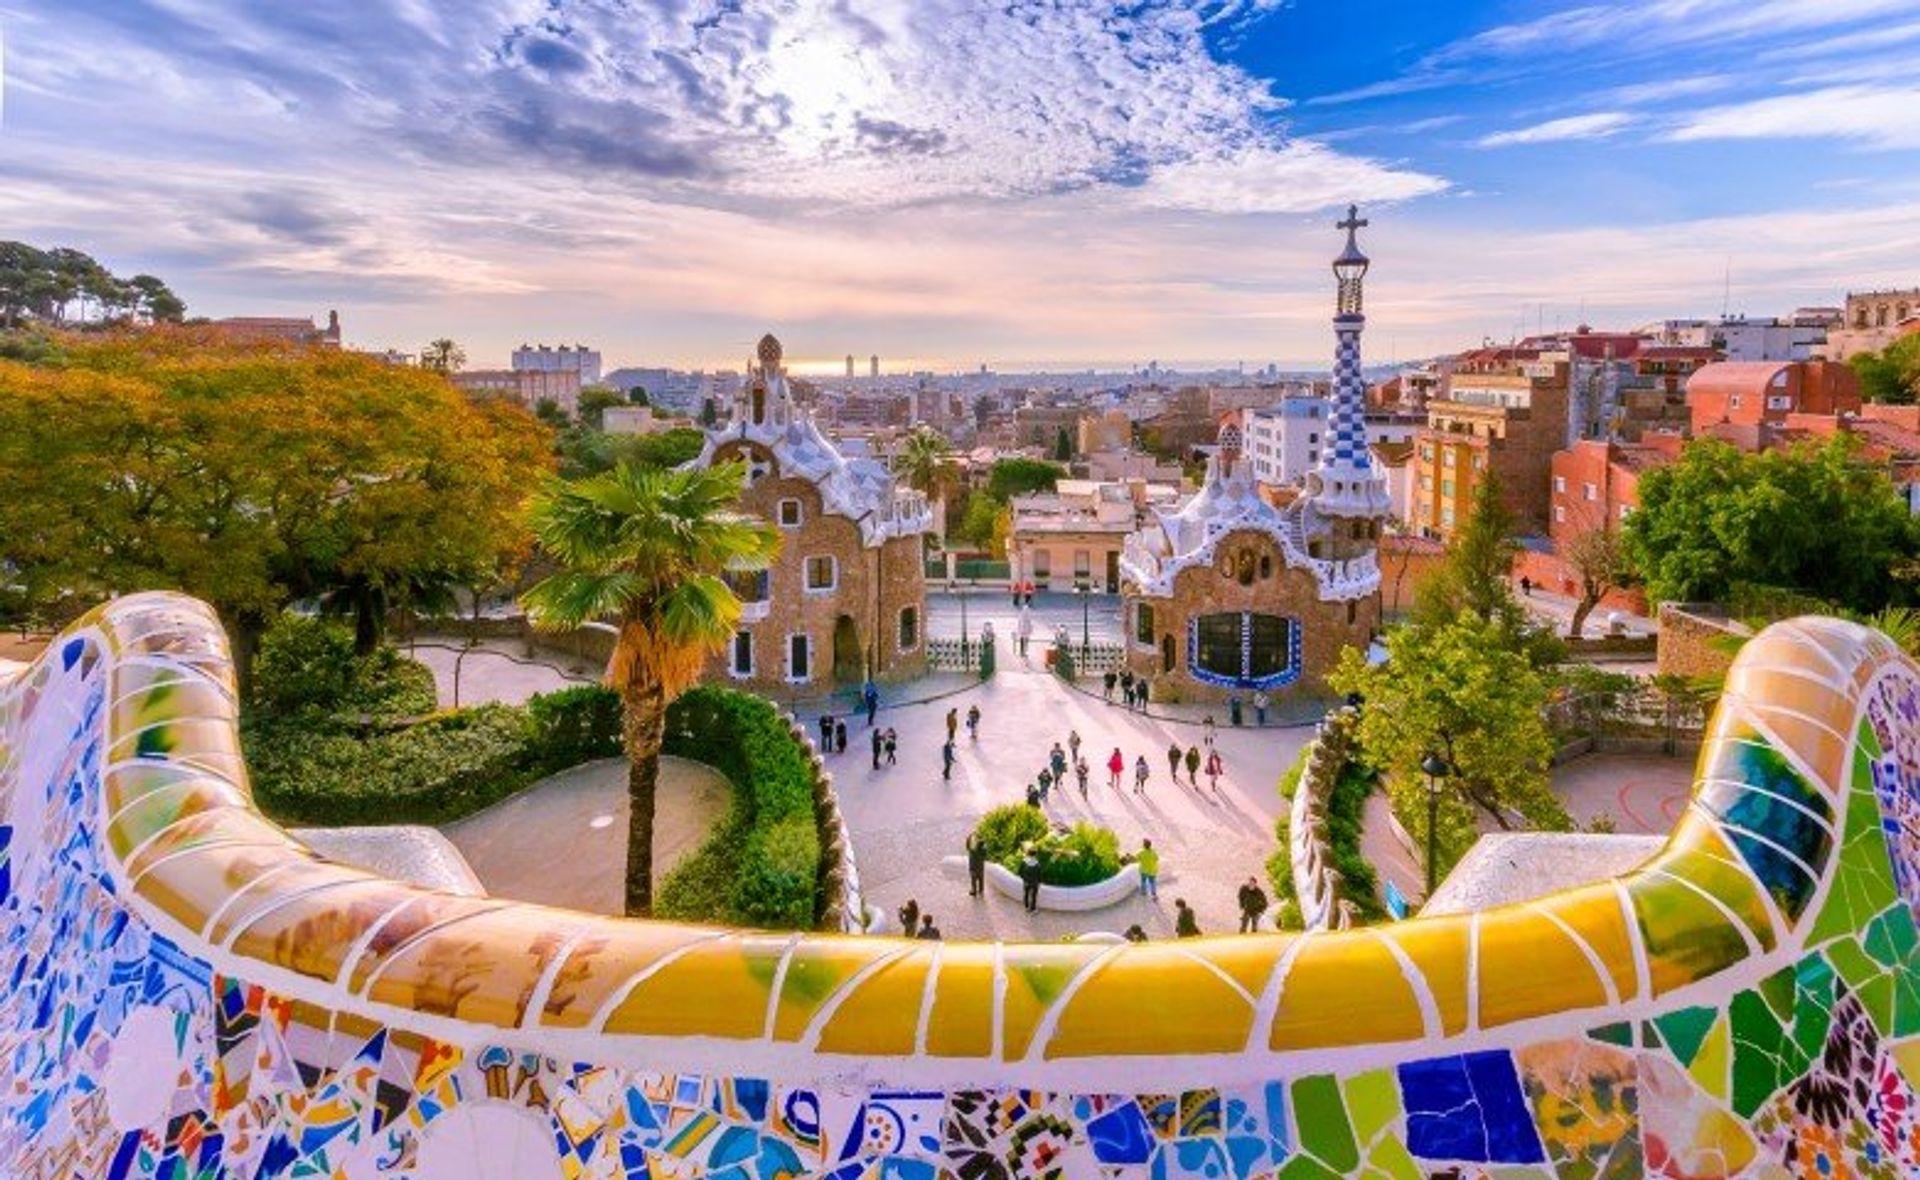 Vibrant Barcelona, home to the Picasso Museum, Guadi's famous Park Park Güell and so much more!